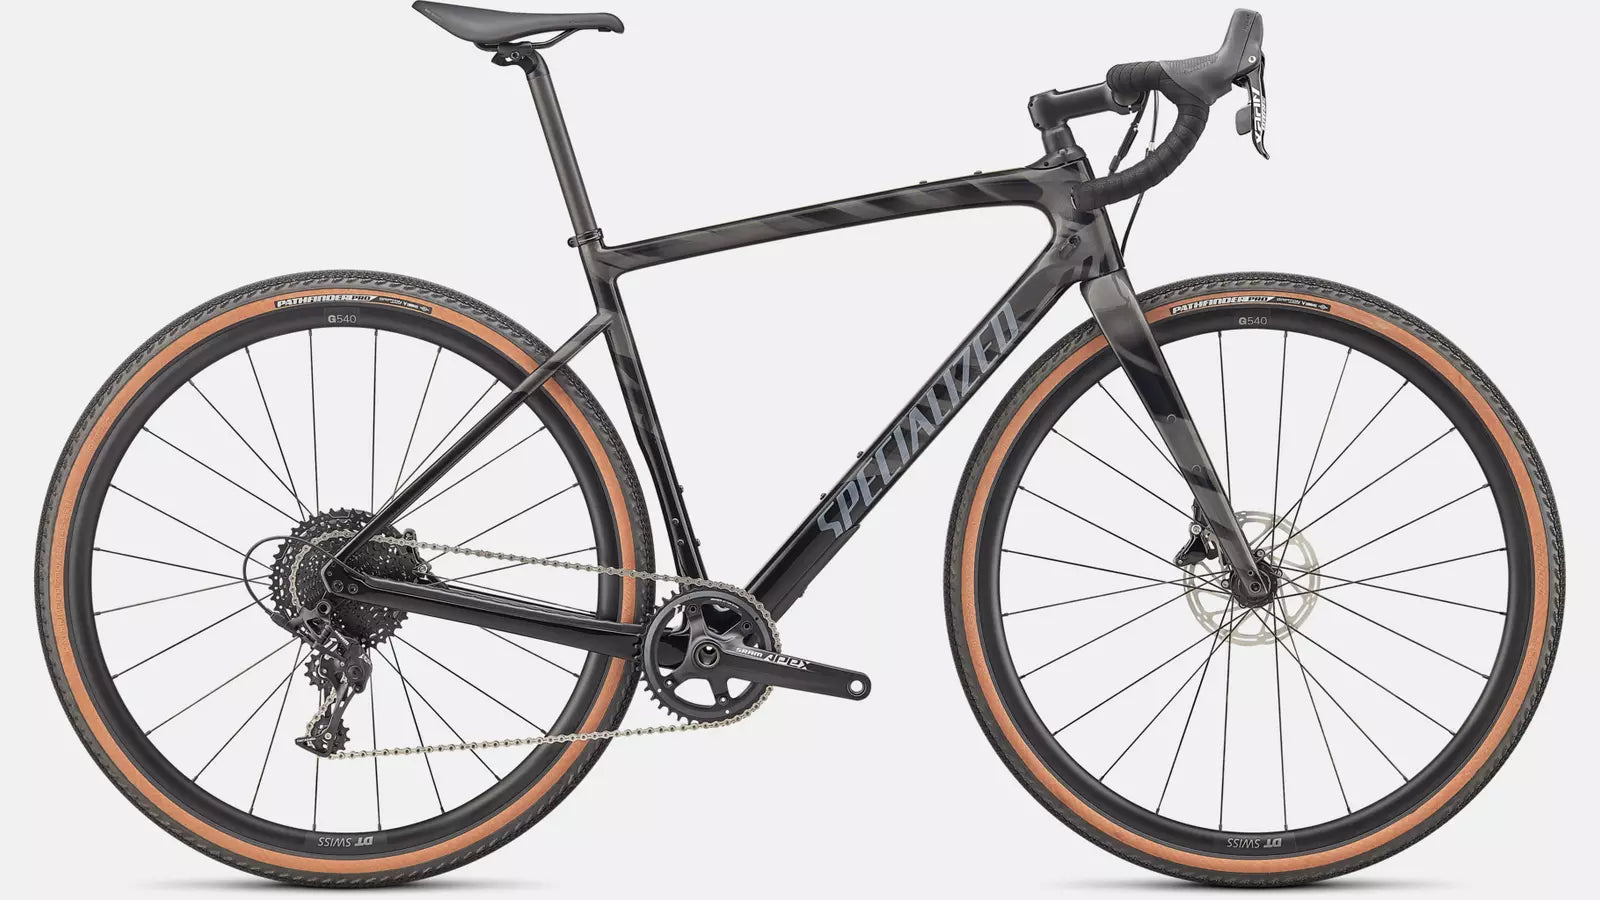 Hyrcykel Specialized Diverge Sport Carbon